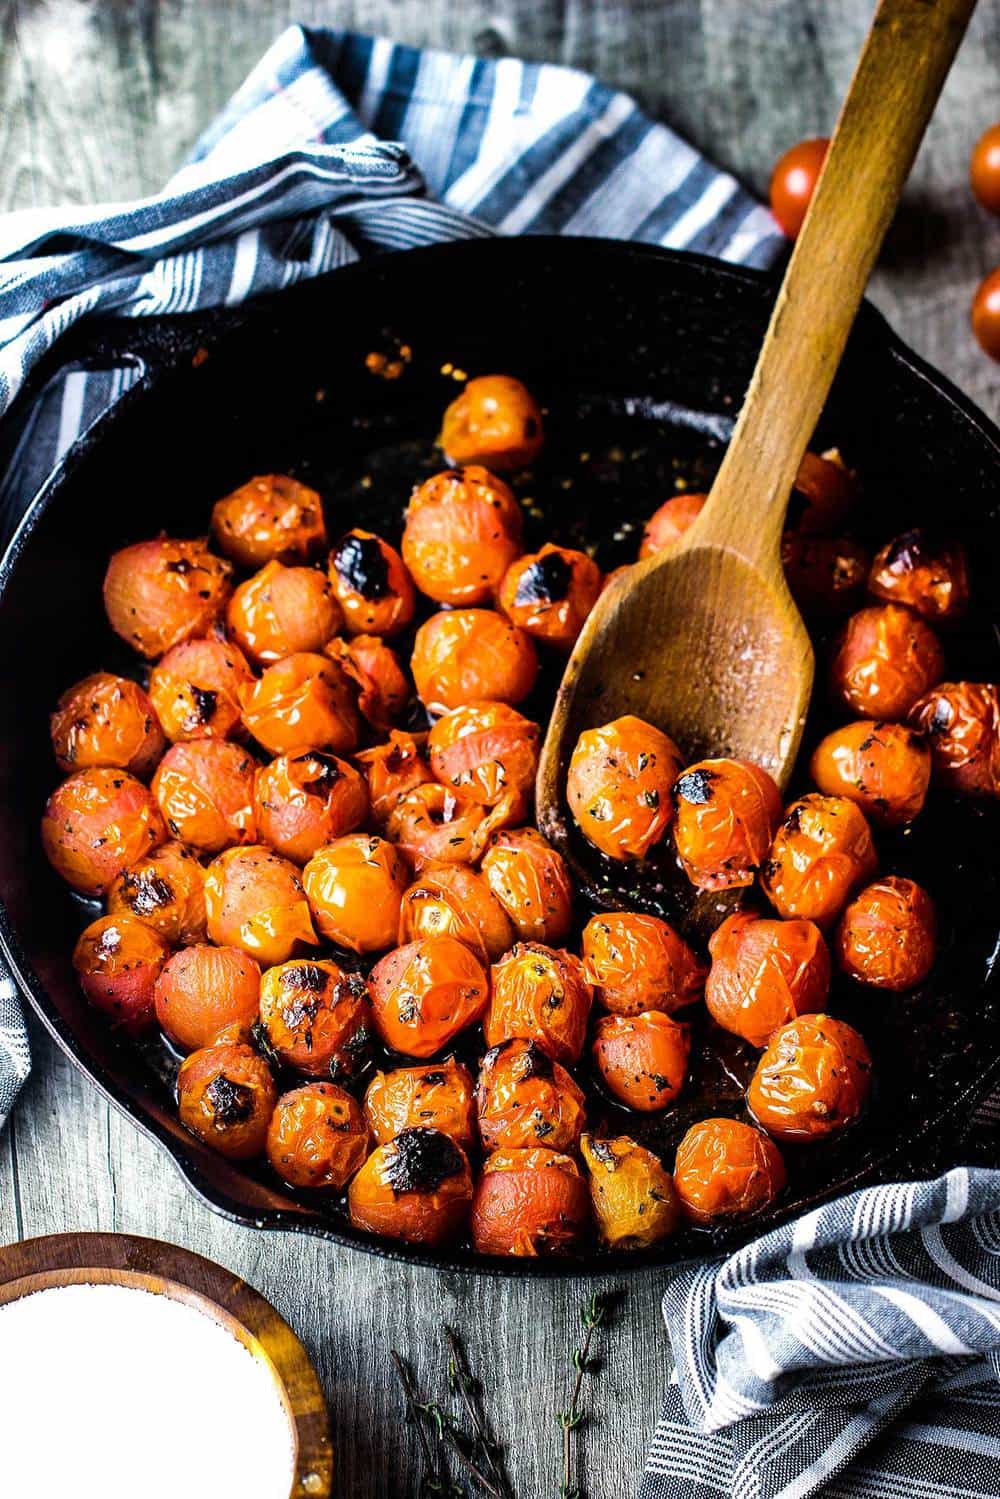 Blistered cherry tomatoes in a cast iron skillet with a wooden spoon